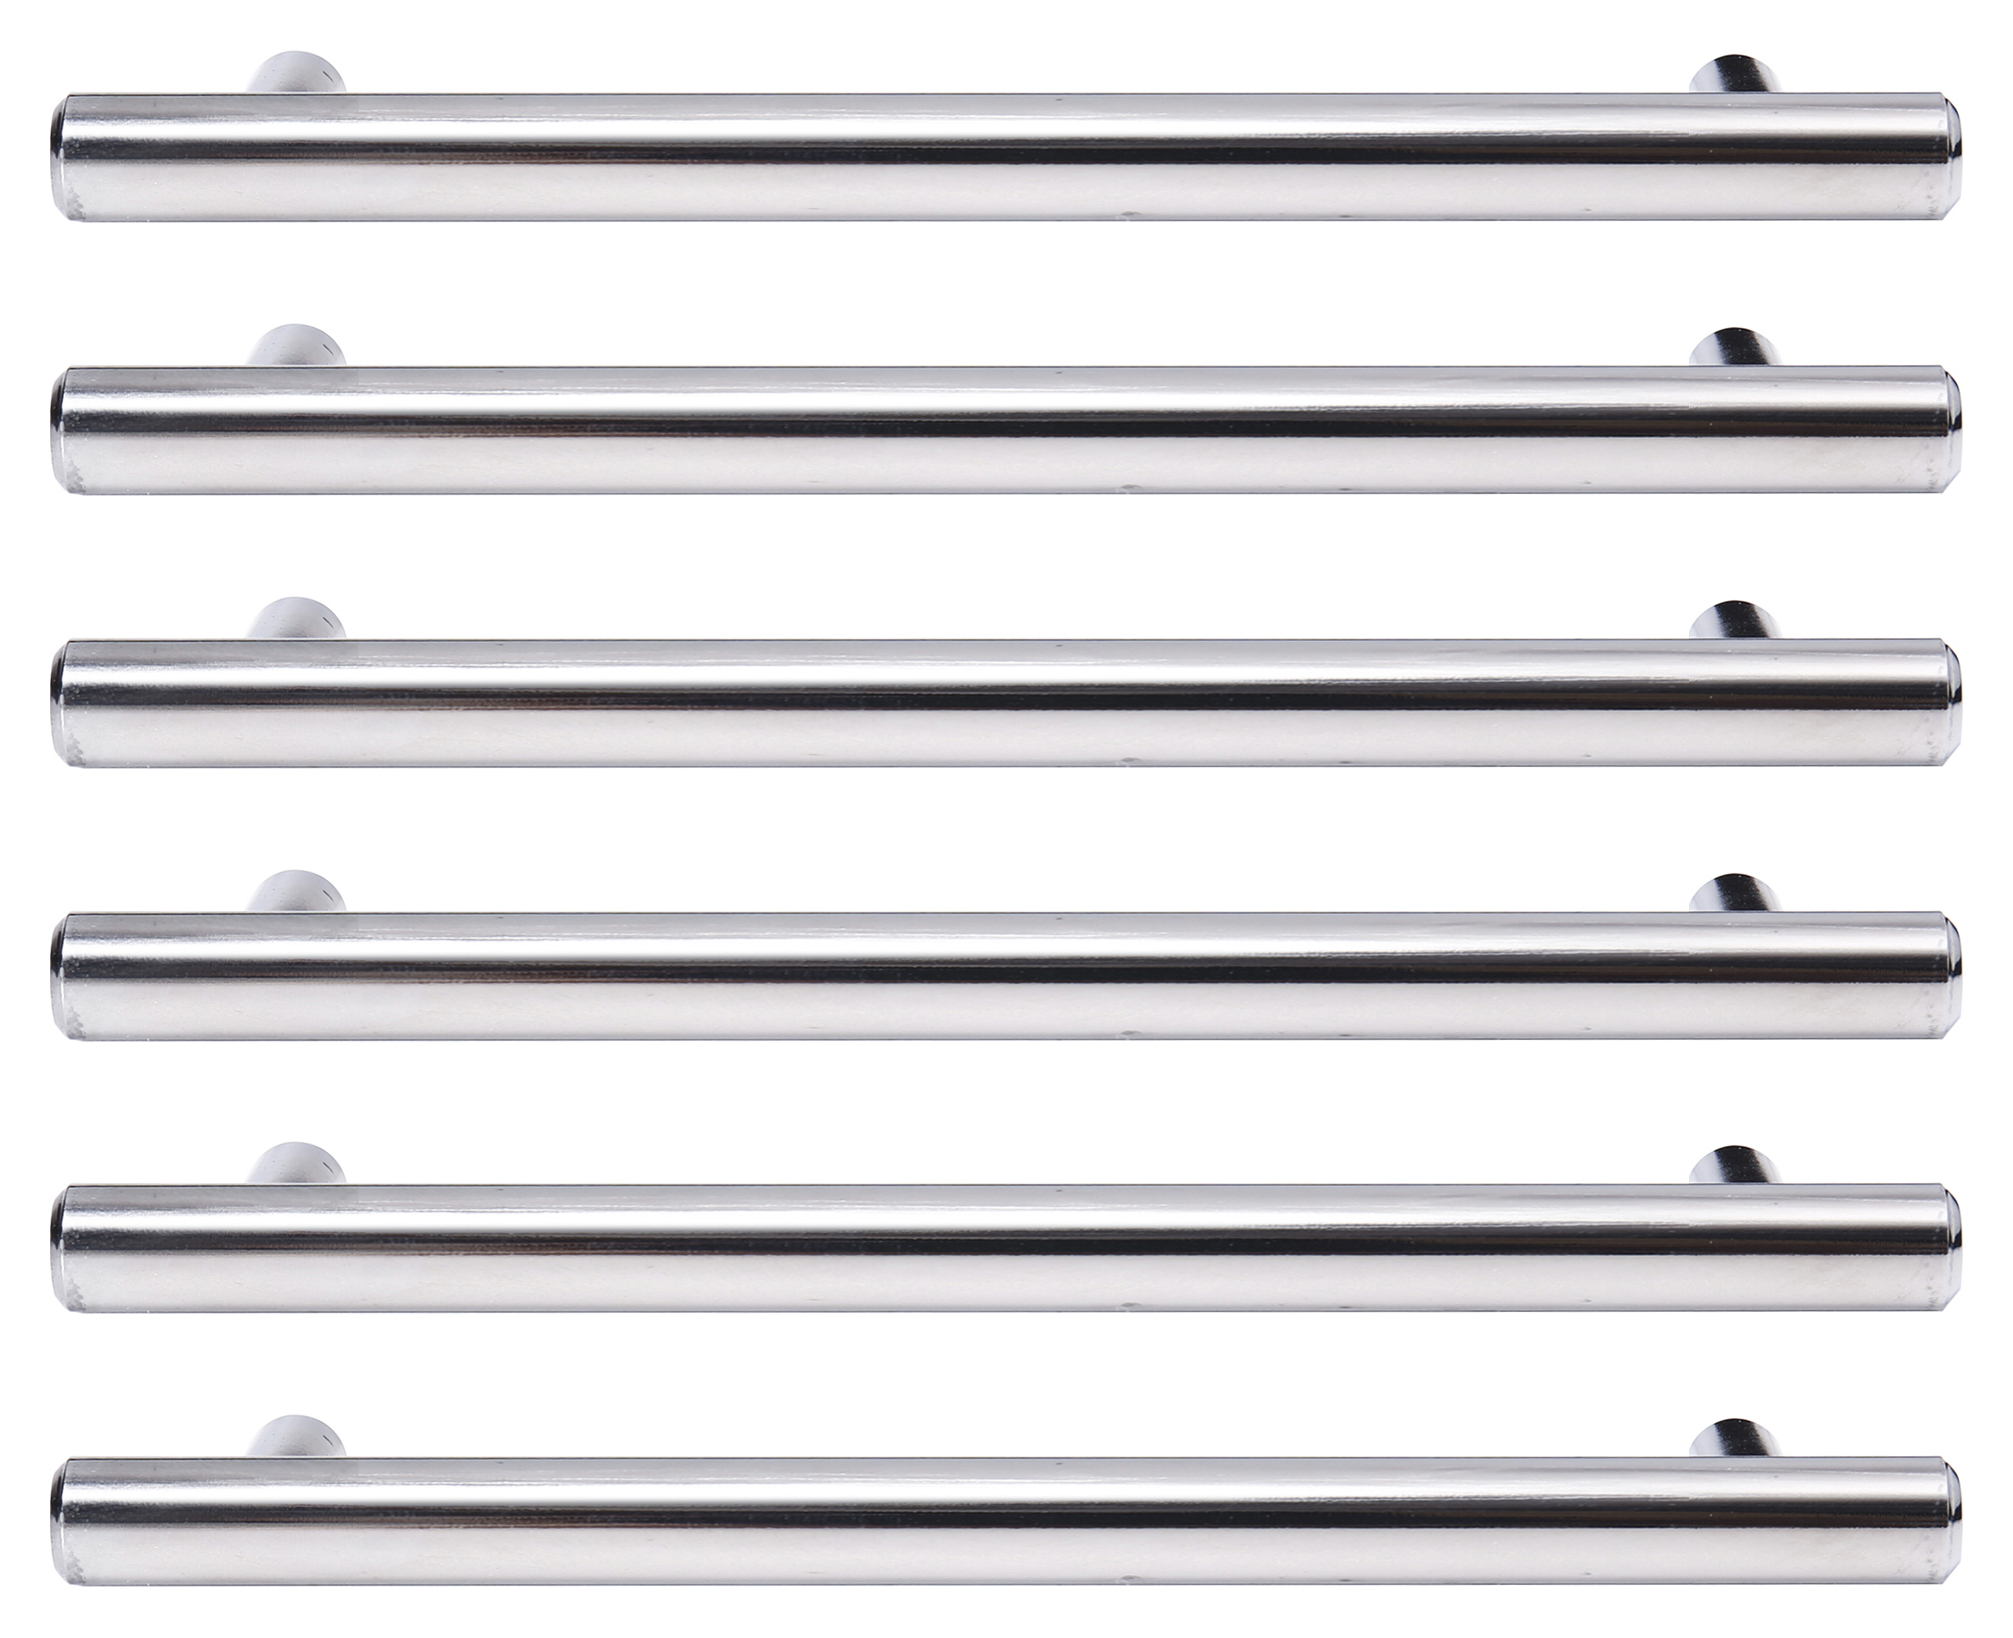 T Bar Polished Chrome Cabinet Handle - 220mm - Pack of 6